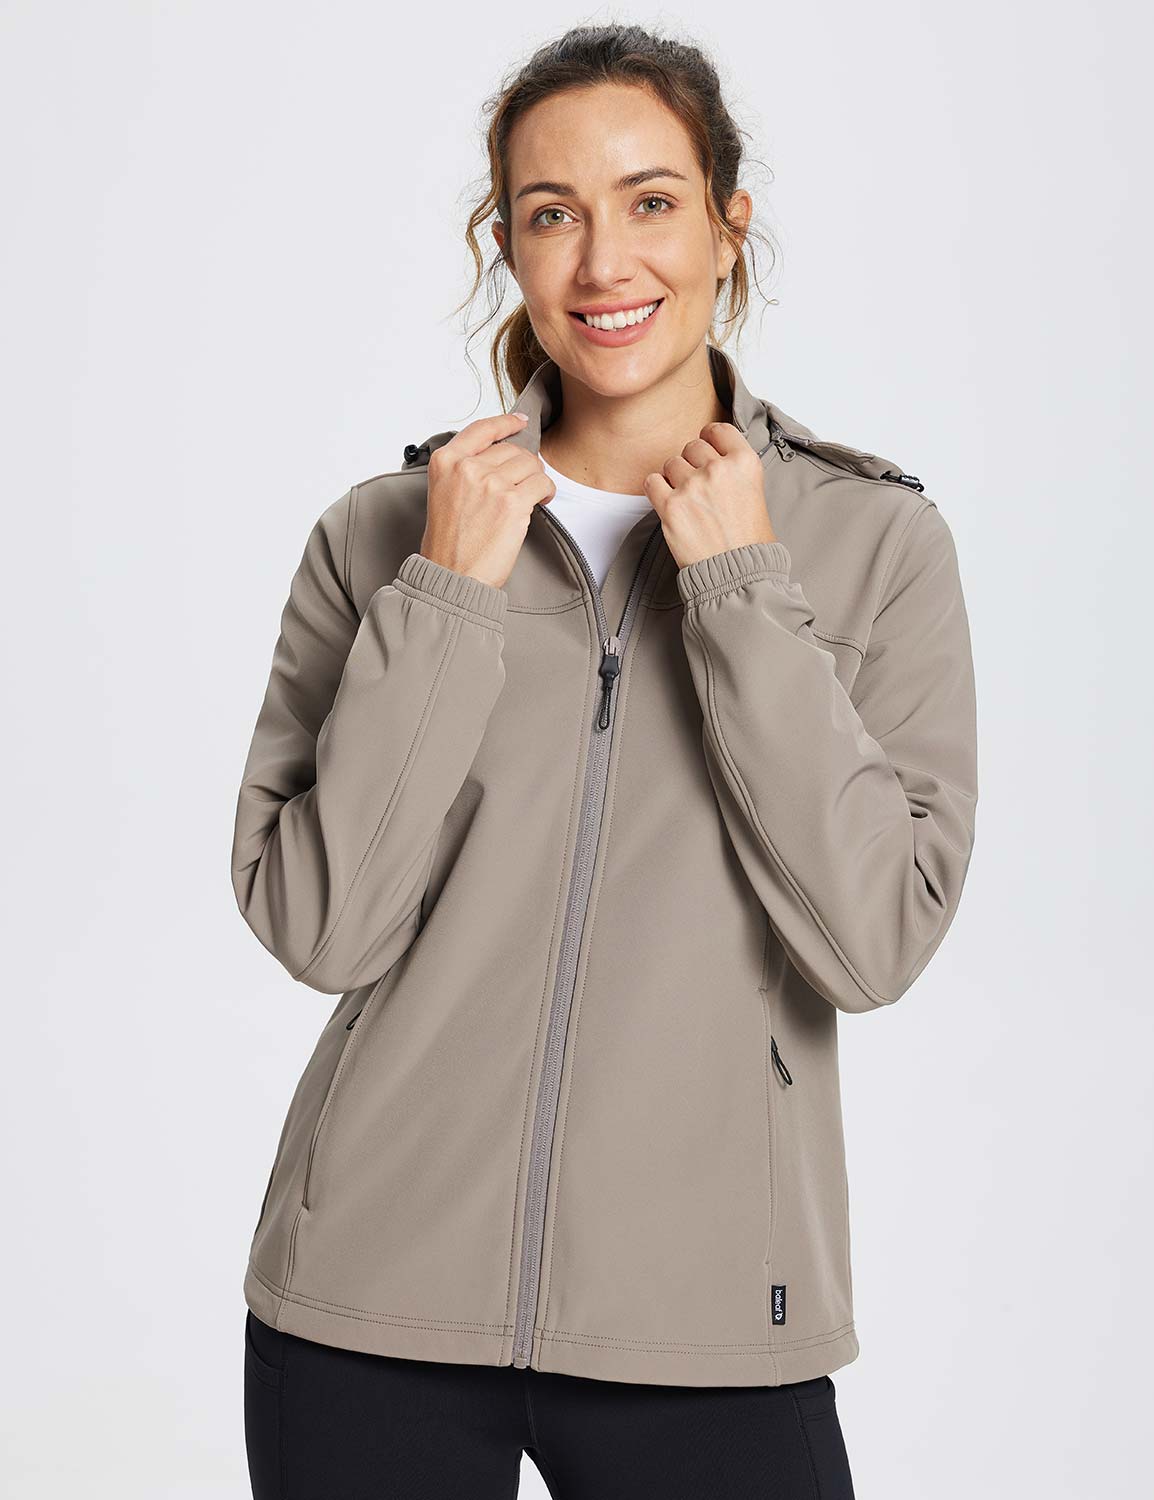 BALEAF Women's Running Jacket Full Zip UP Loose Soft Workout Hiking with  Hoodie Zip Pockets Track Sports Yoga Athletic